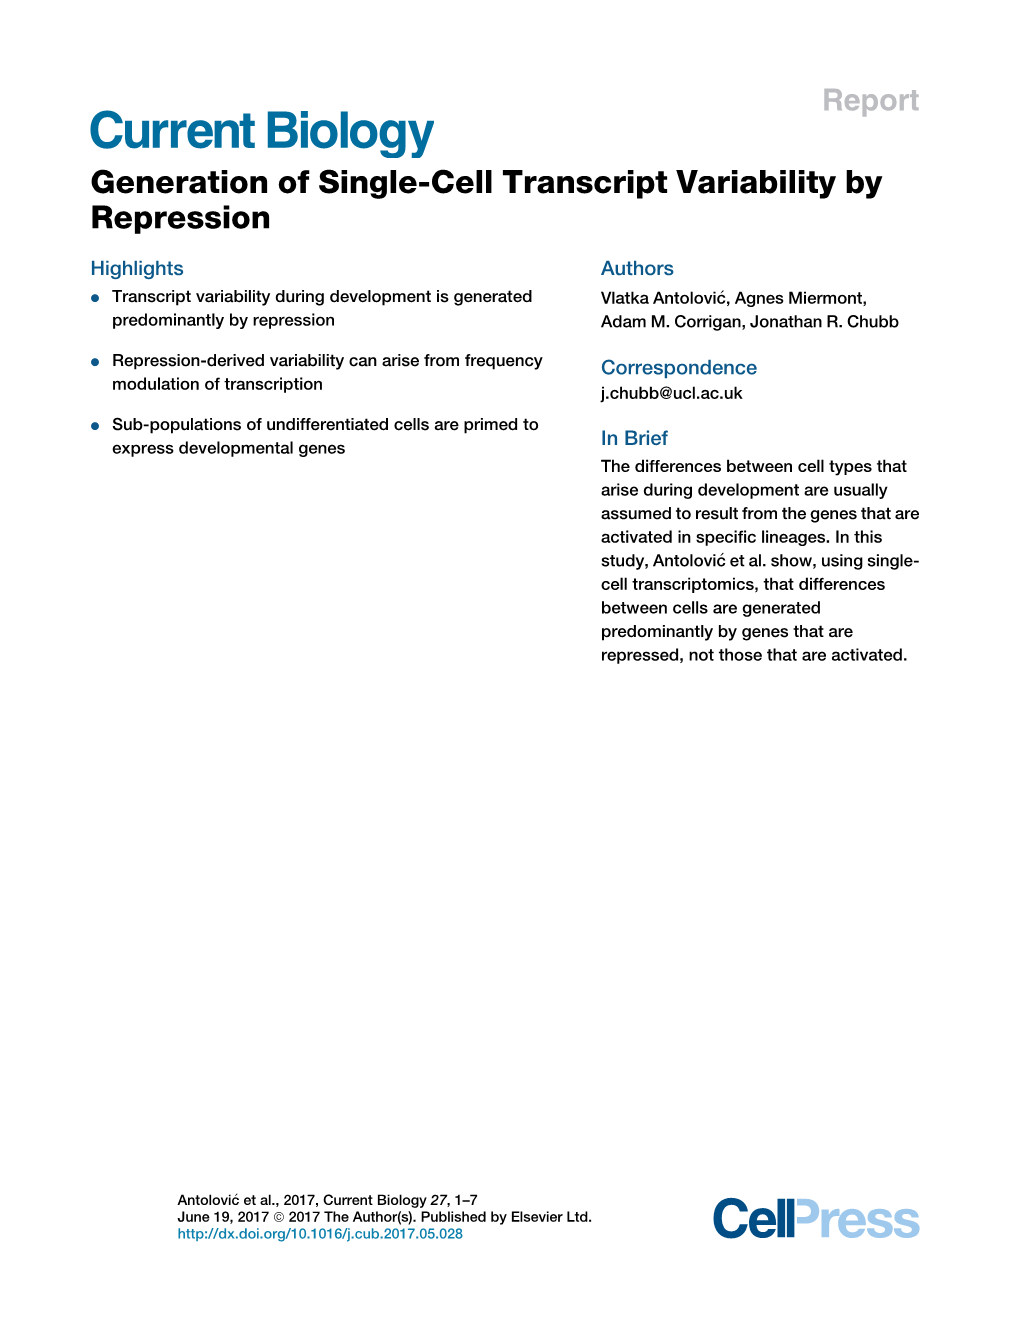 Generation of Single-Cell Transcript Variability by Repression